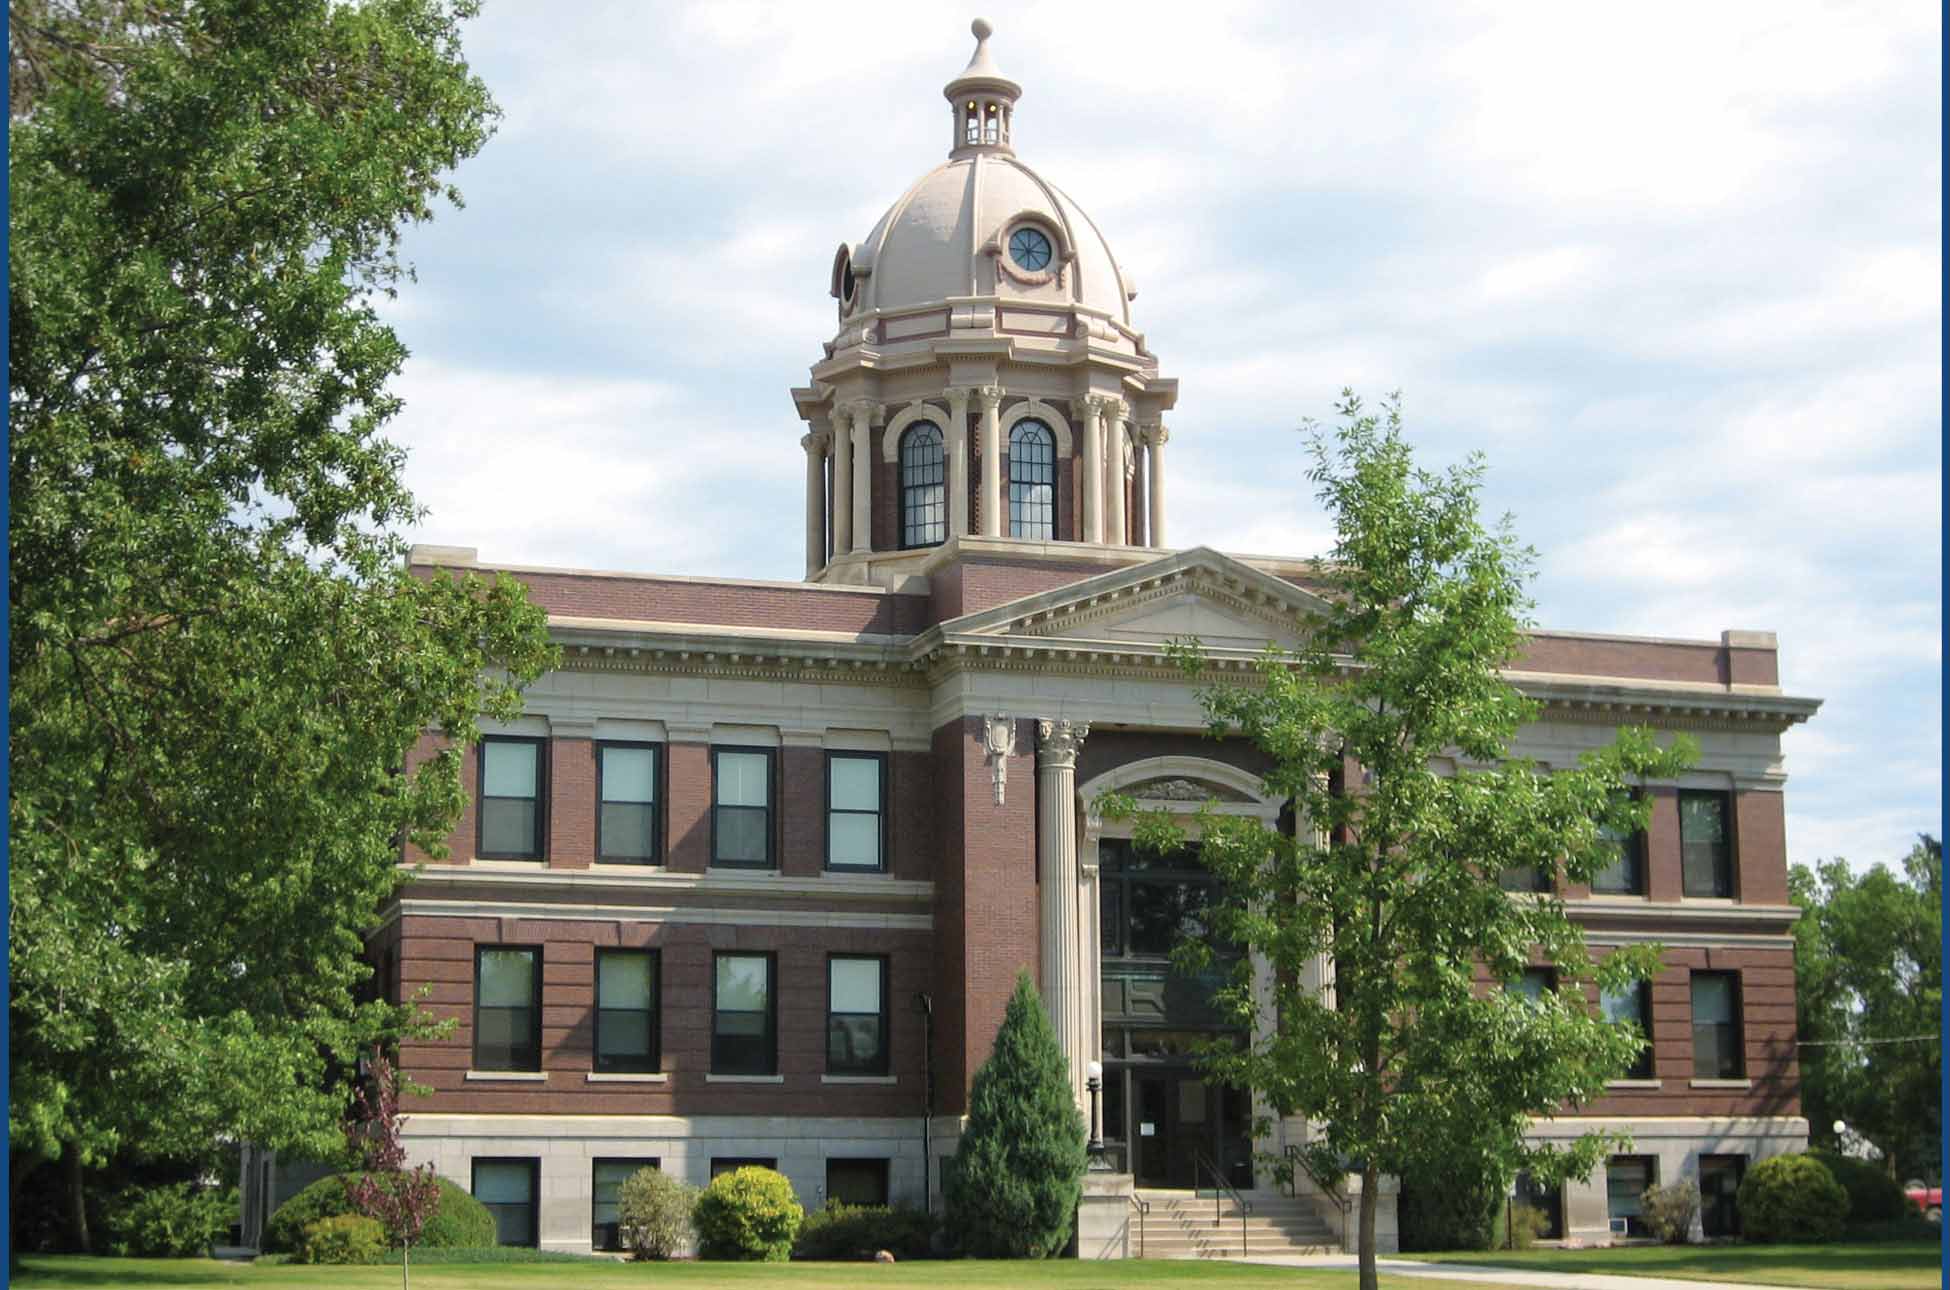 The Dickey County courthouse